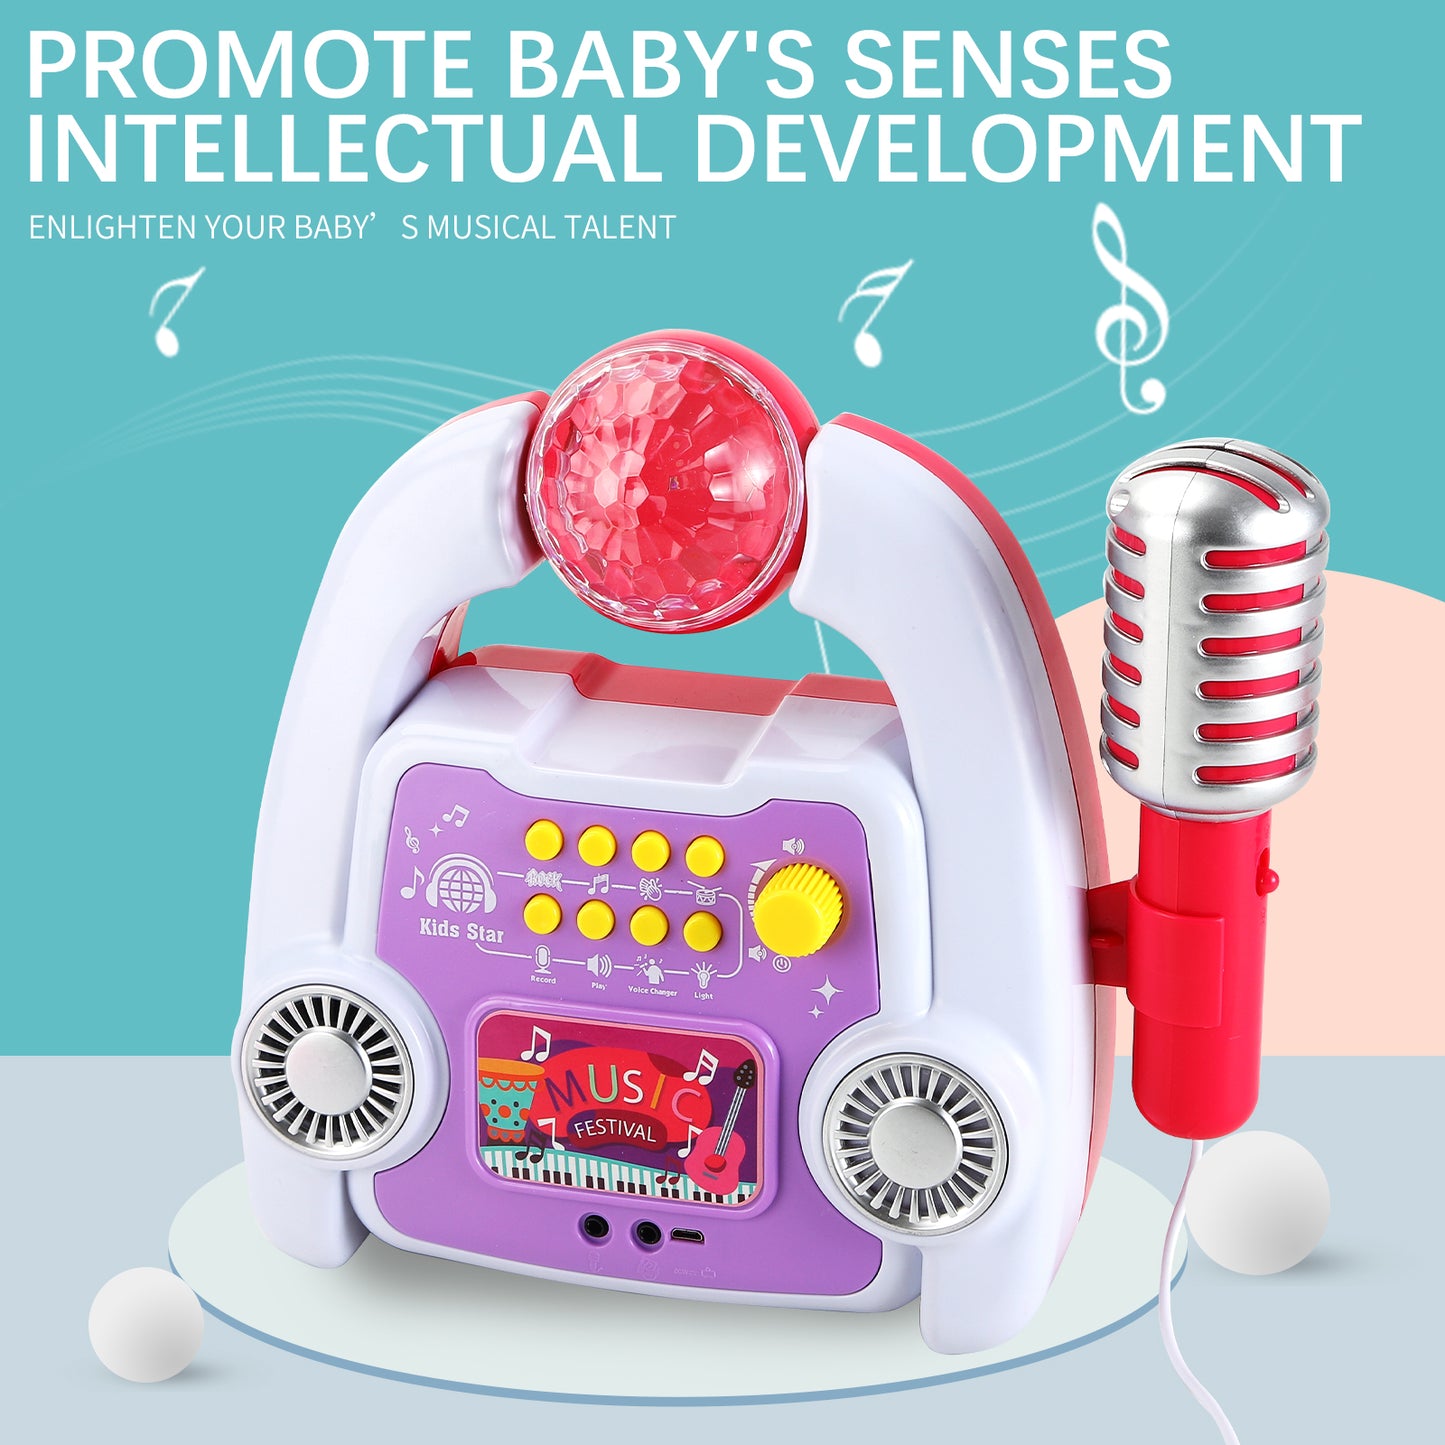 AOQIMITENJOY Musical Instrument Electronic Karaoke Machine Toys with Micphone Lighting Children's Toys Birthday Gifts for Boys and Girls 3 Year Old+ HK-8198A